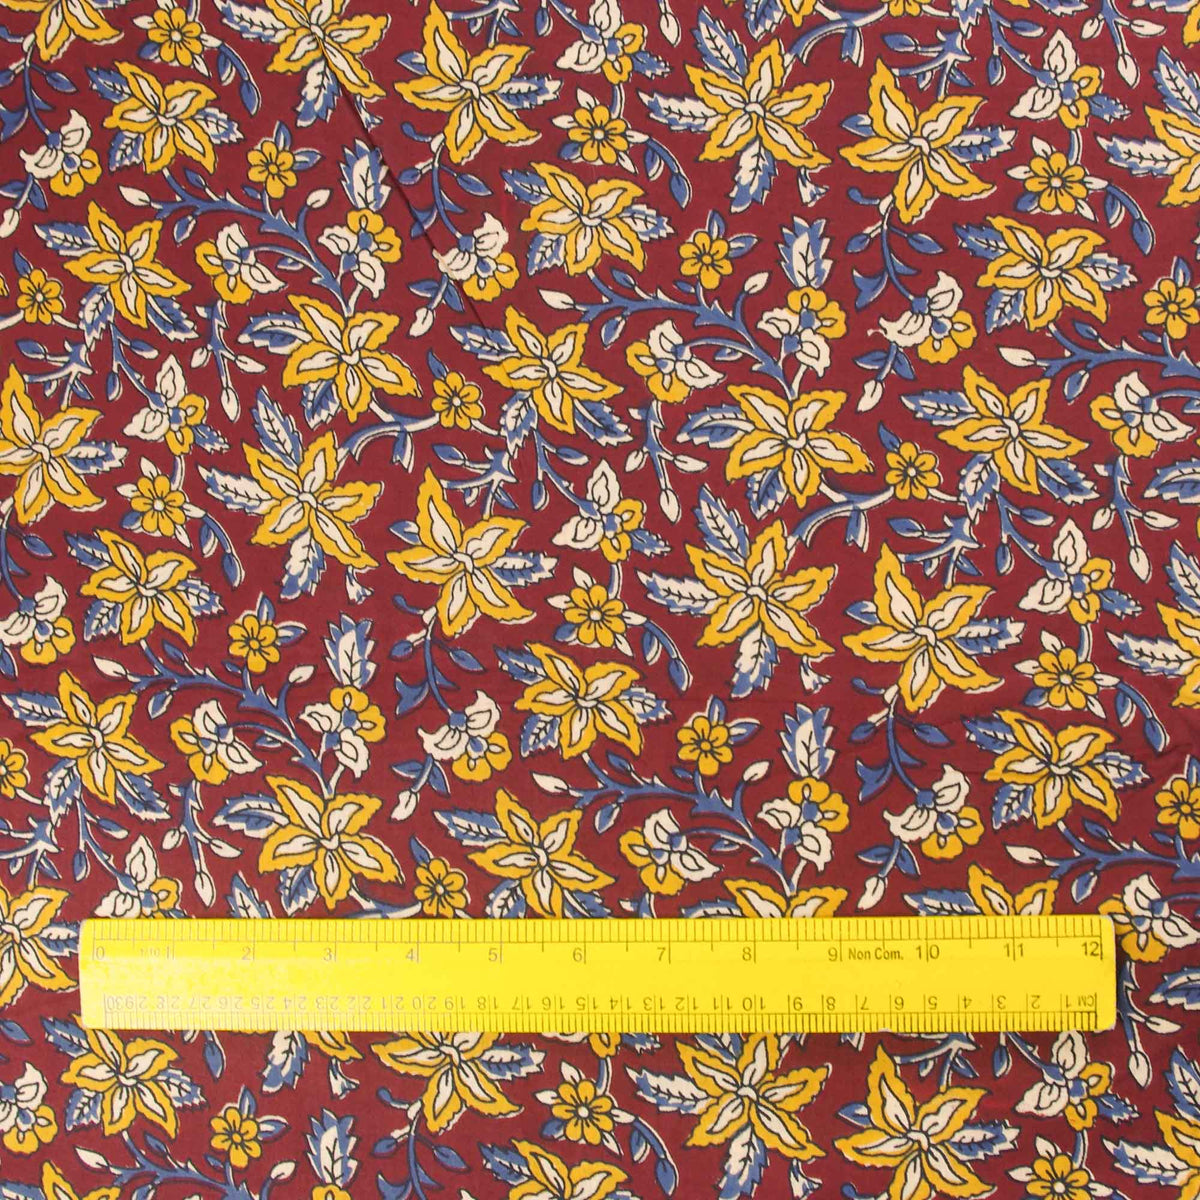 Hand Screen Printed 100% Cotton Fabric -Yellow Flowers On Brown (Design 370)